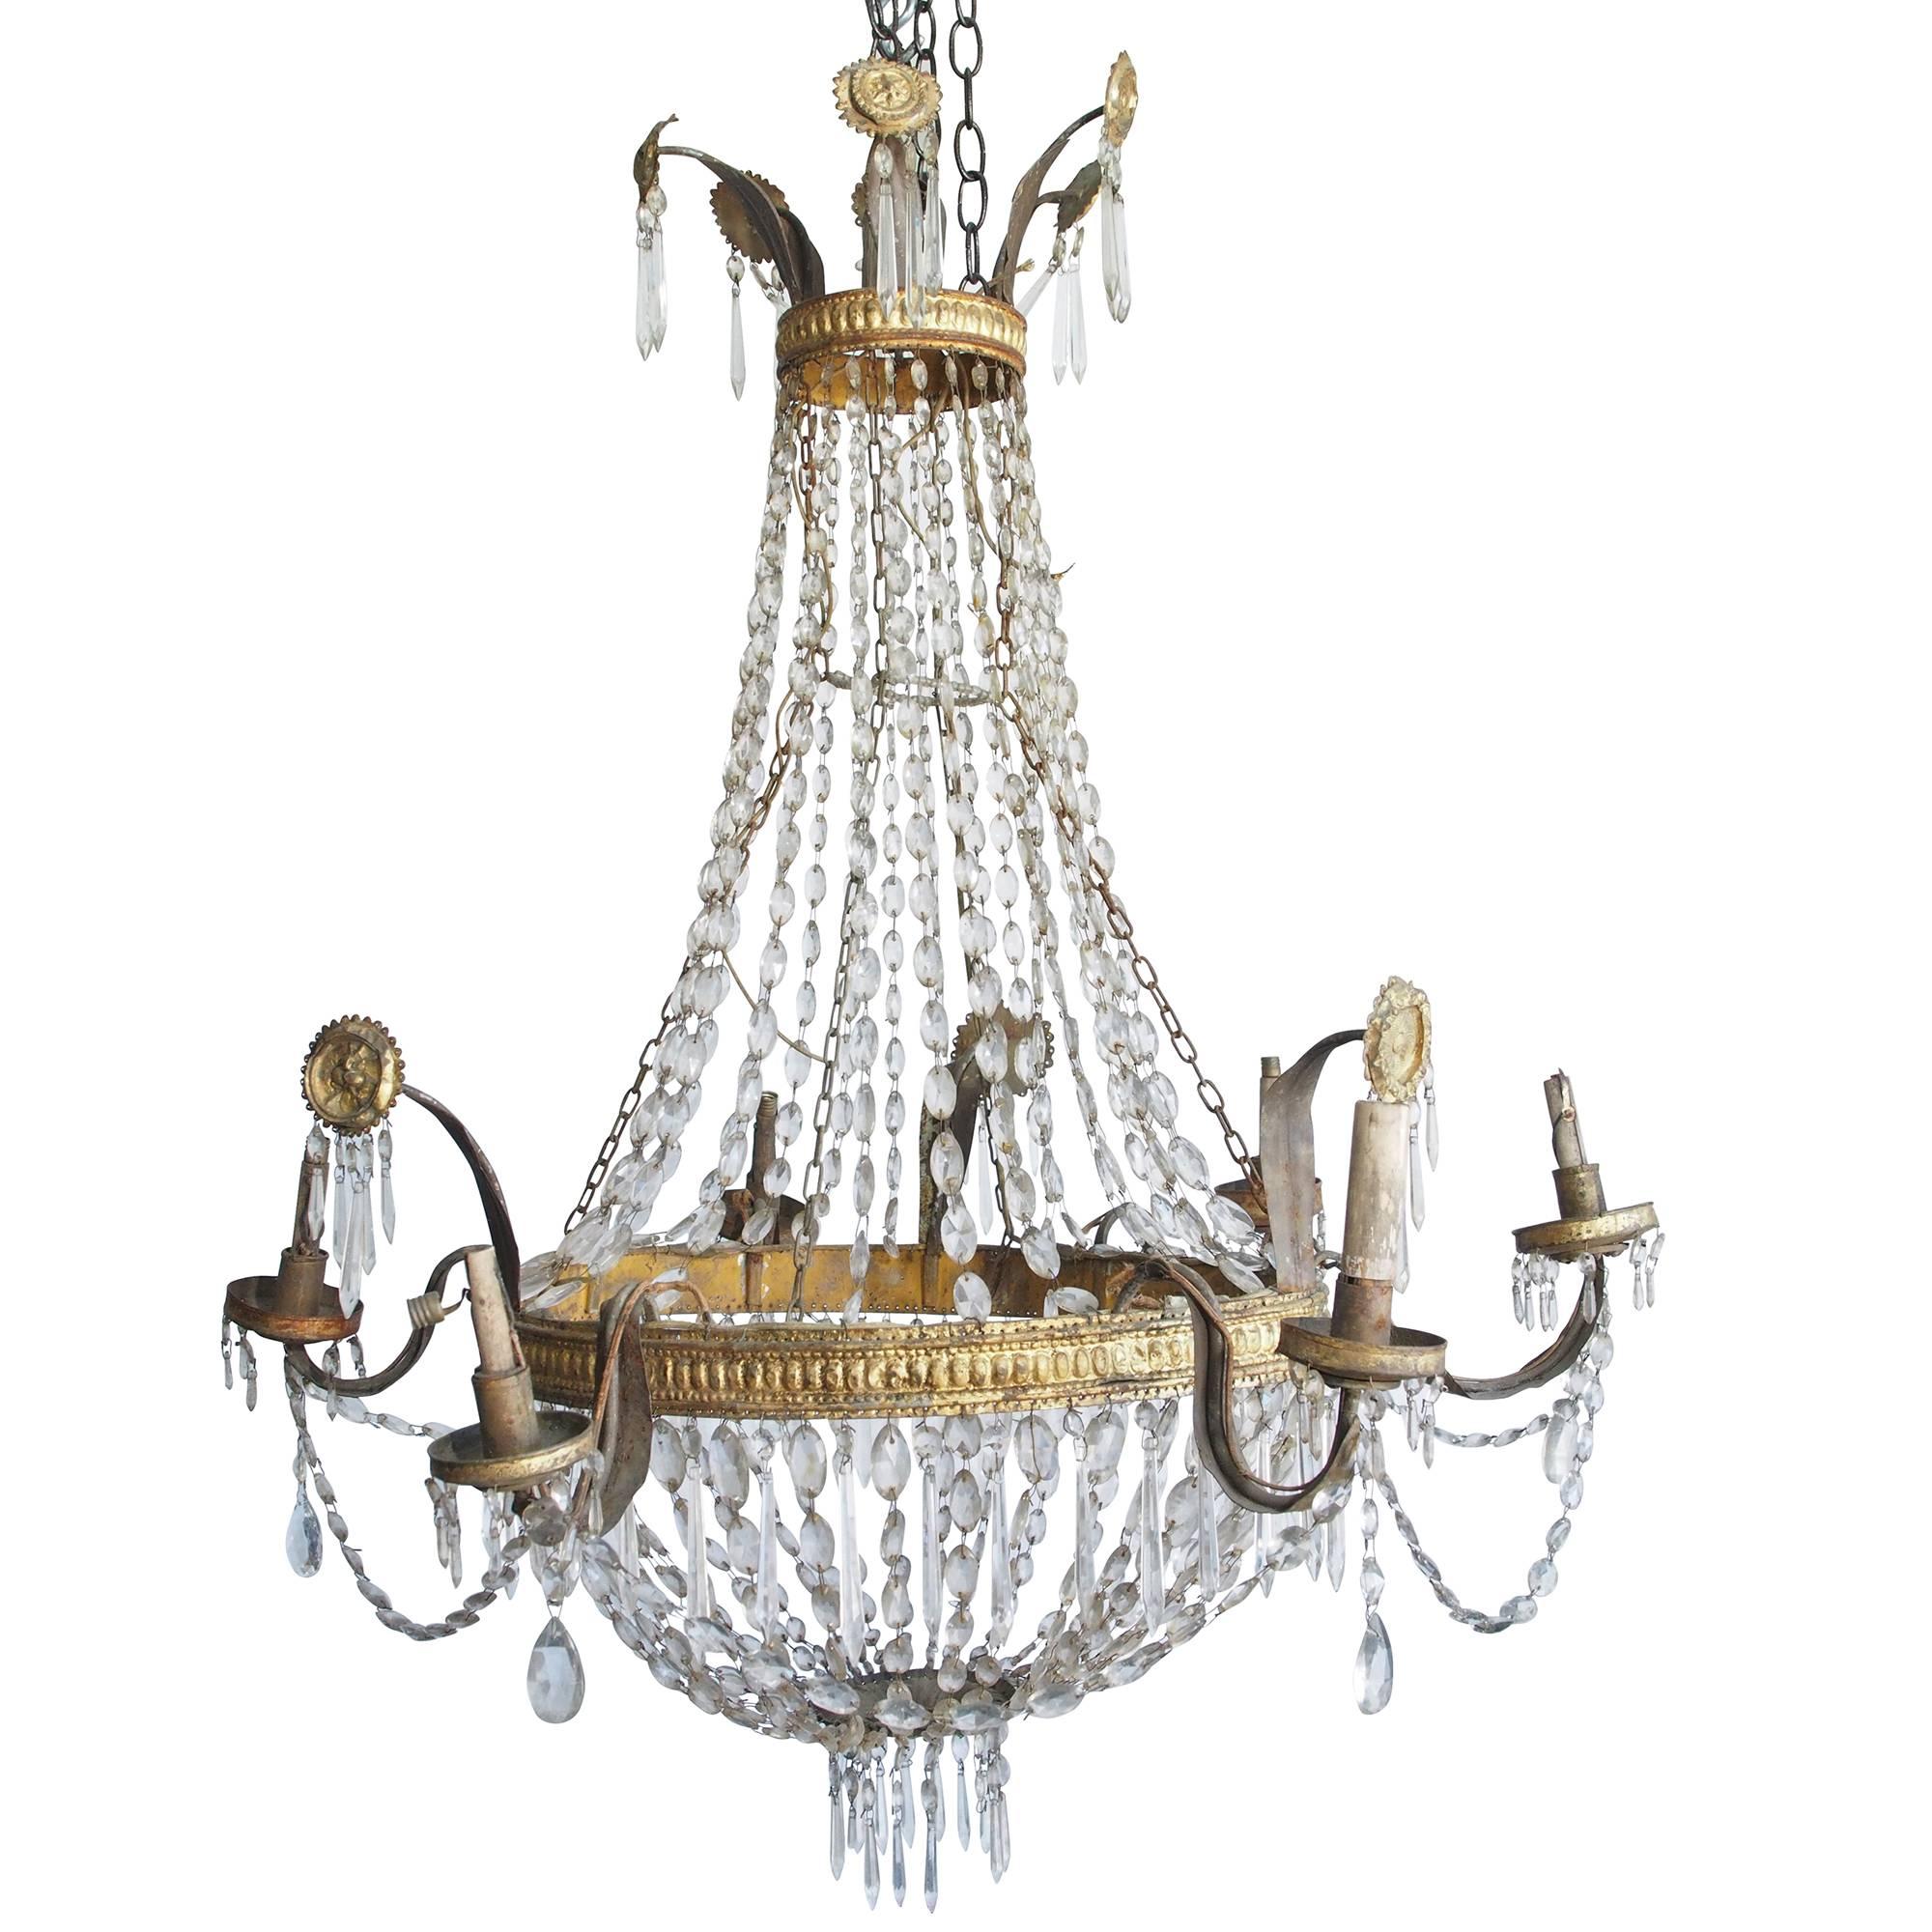 Tara Shaw Antiques - 18th century Italian Empire chandelier with crystal beading and gilded tole medallions.